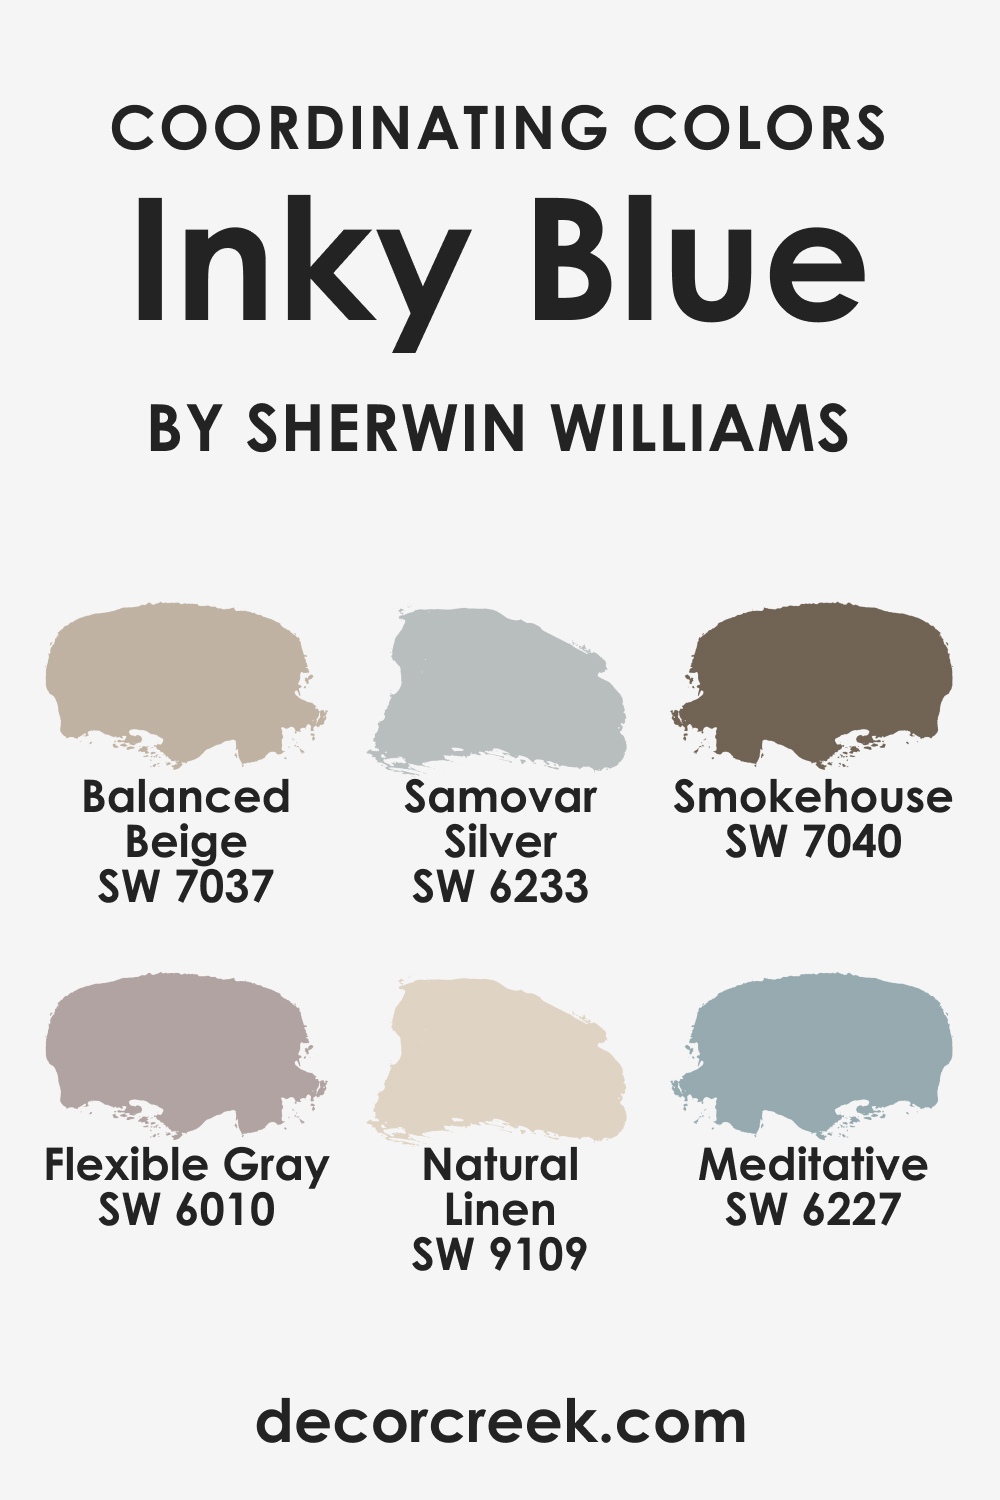 Inky Blue SW 9149 Coordinating Colors